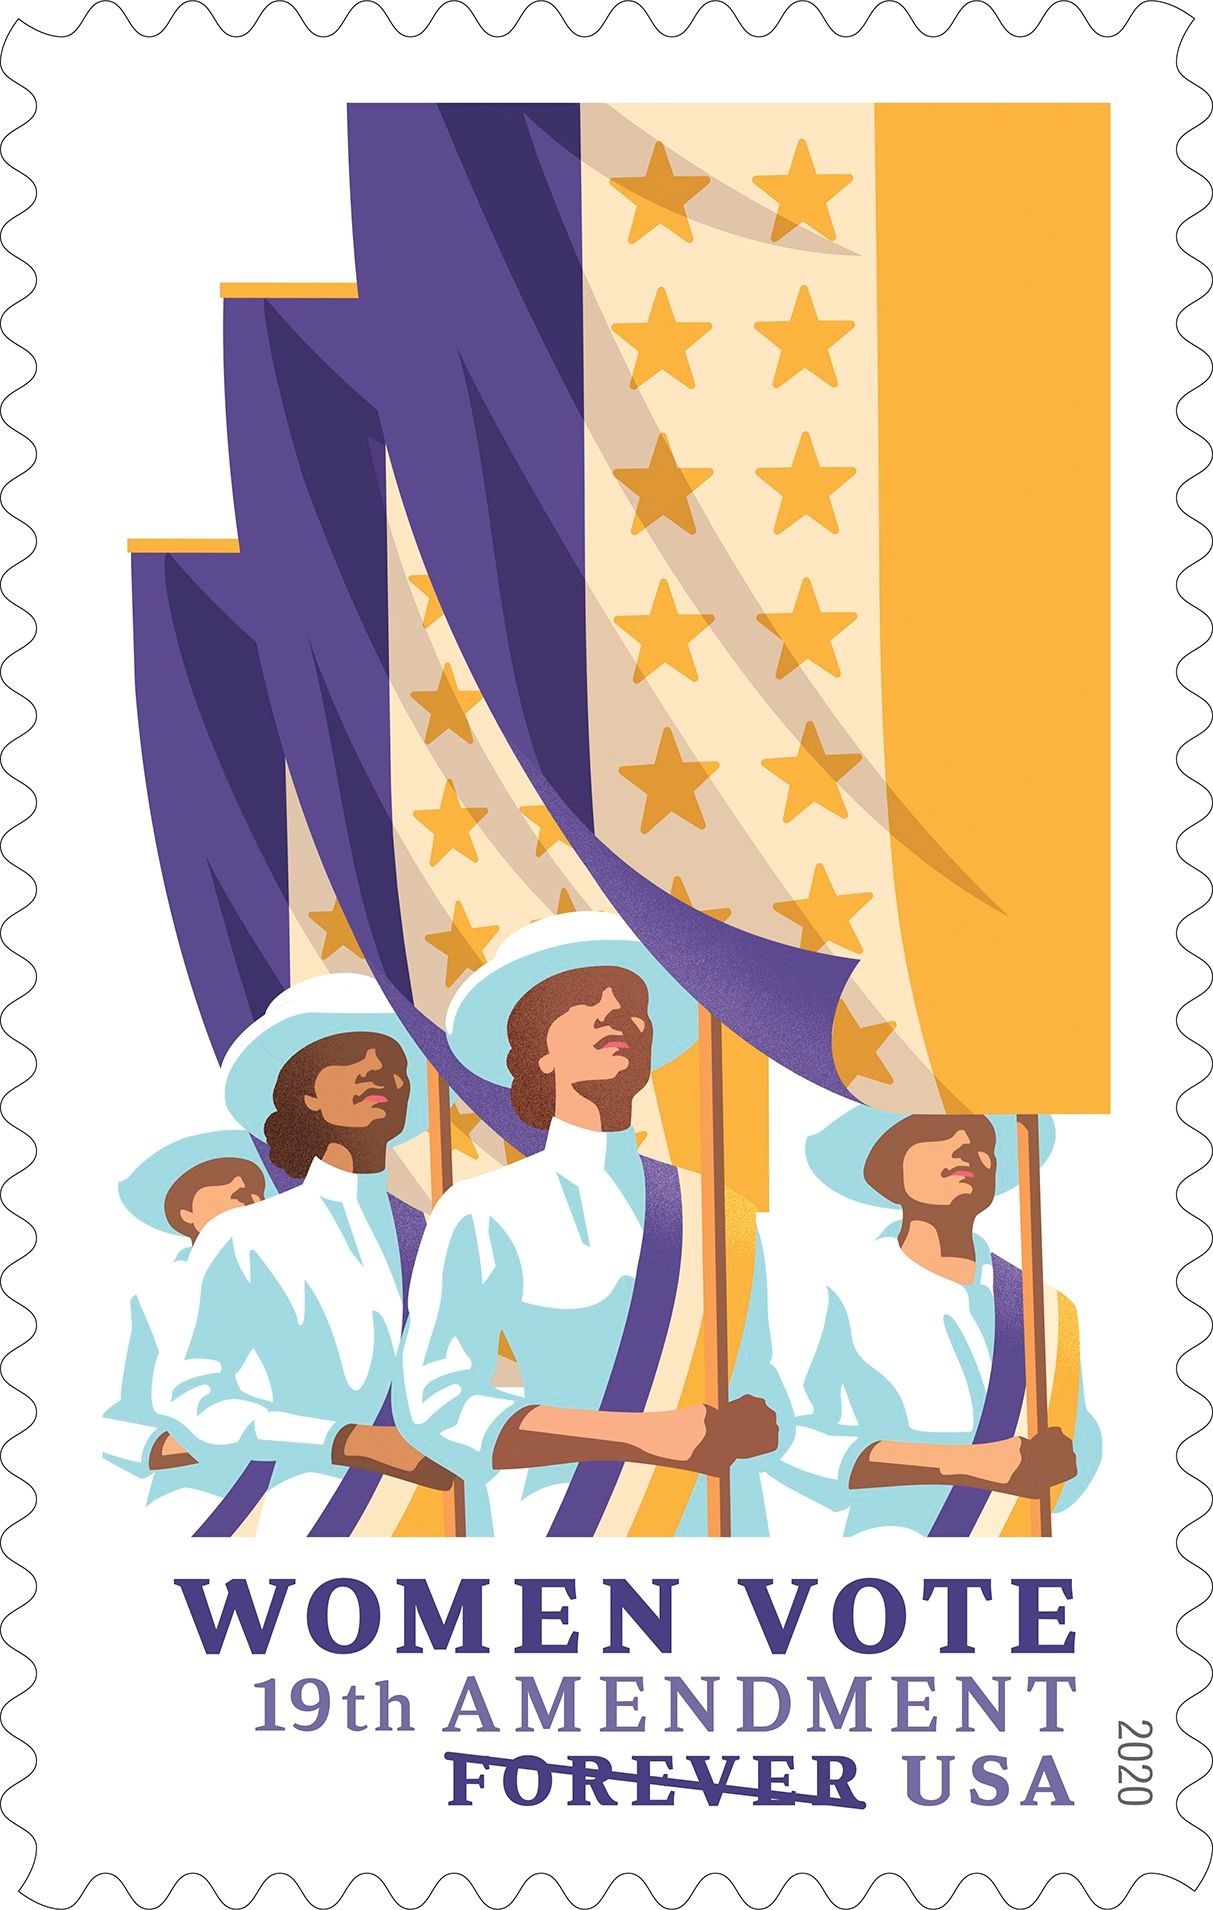 A new Forever stamp, 19th Amendment: Women Vote